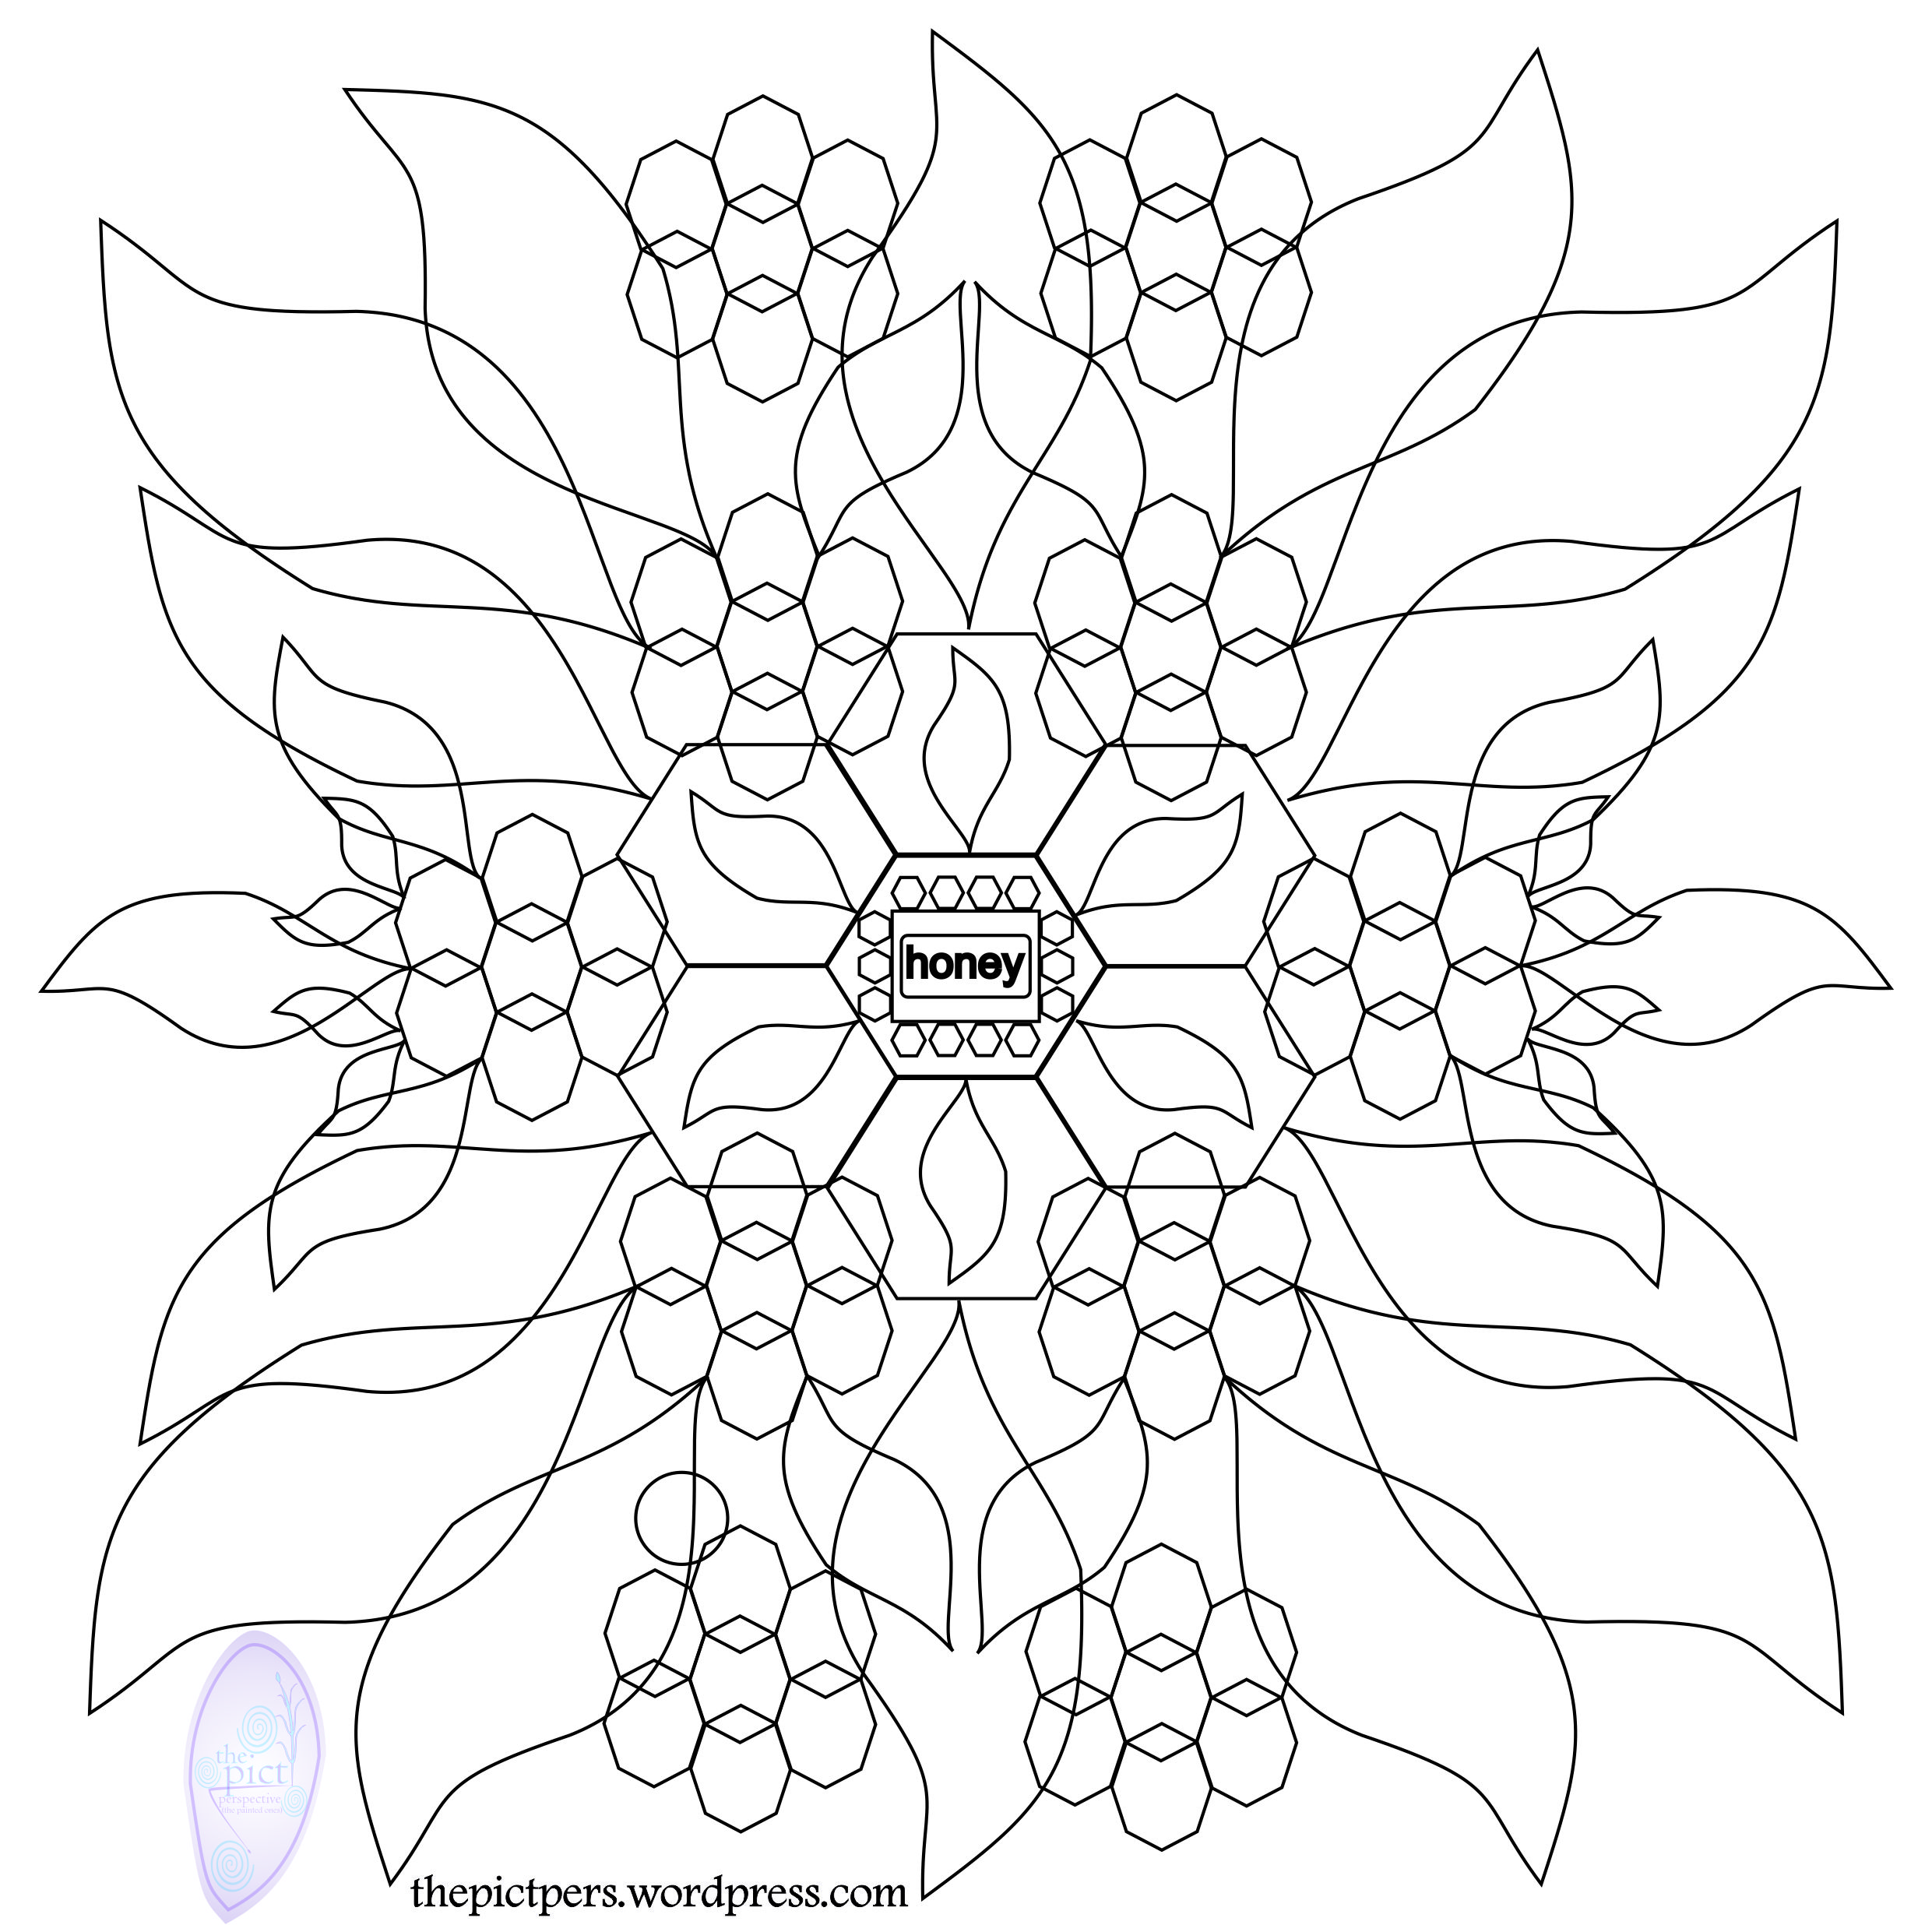 Digital design - this design is in one of our books - Mandala Art and Doodling Book on Amazon